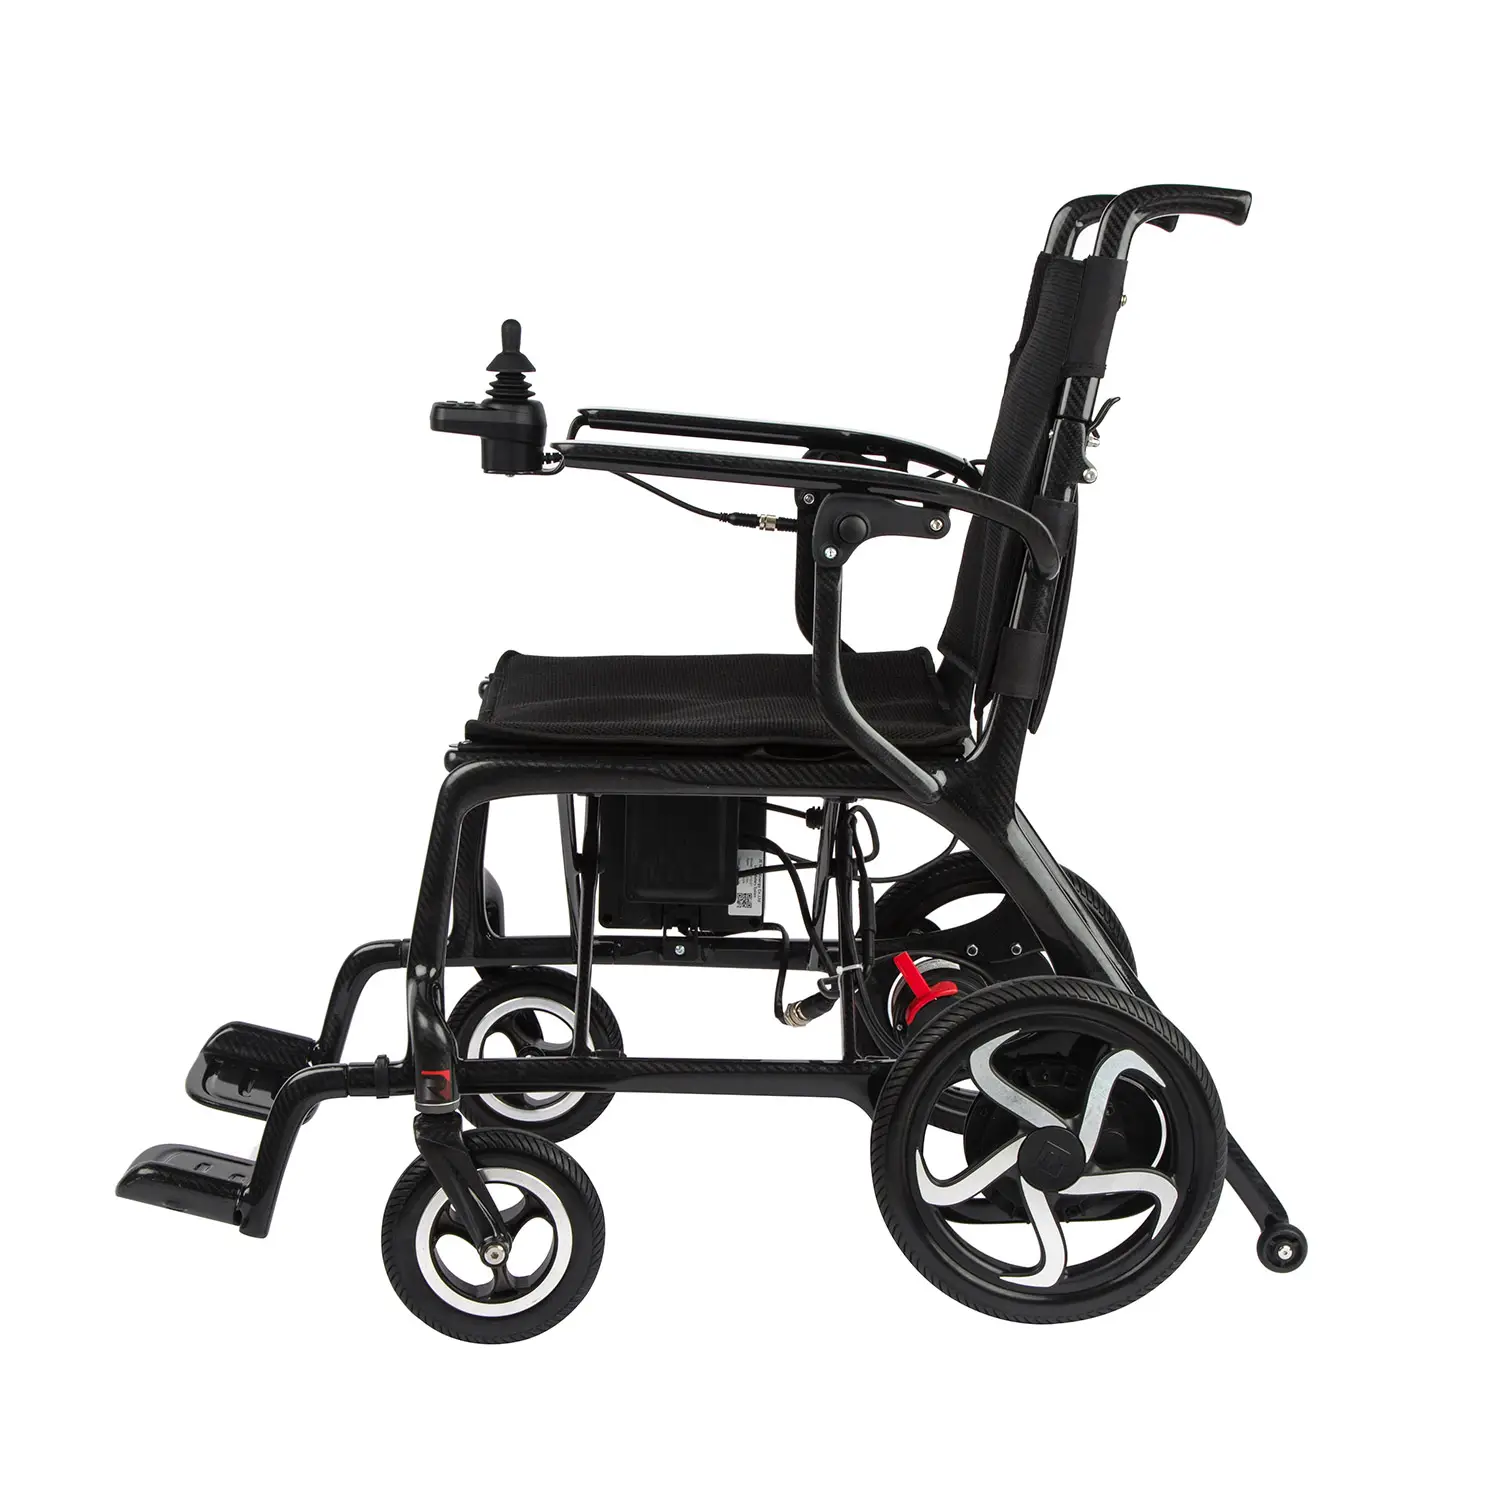 New Arrival 300 lbs Strong Loading 300W Brushless Motor Light Weight Carbon Fiber Power Electric Folding Wheelchair